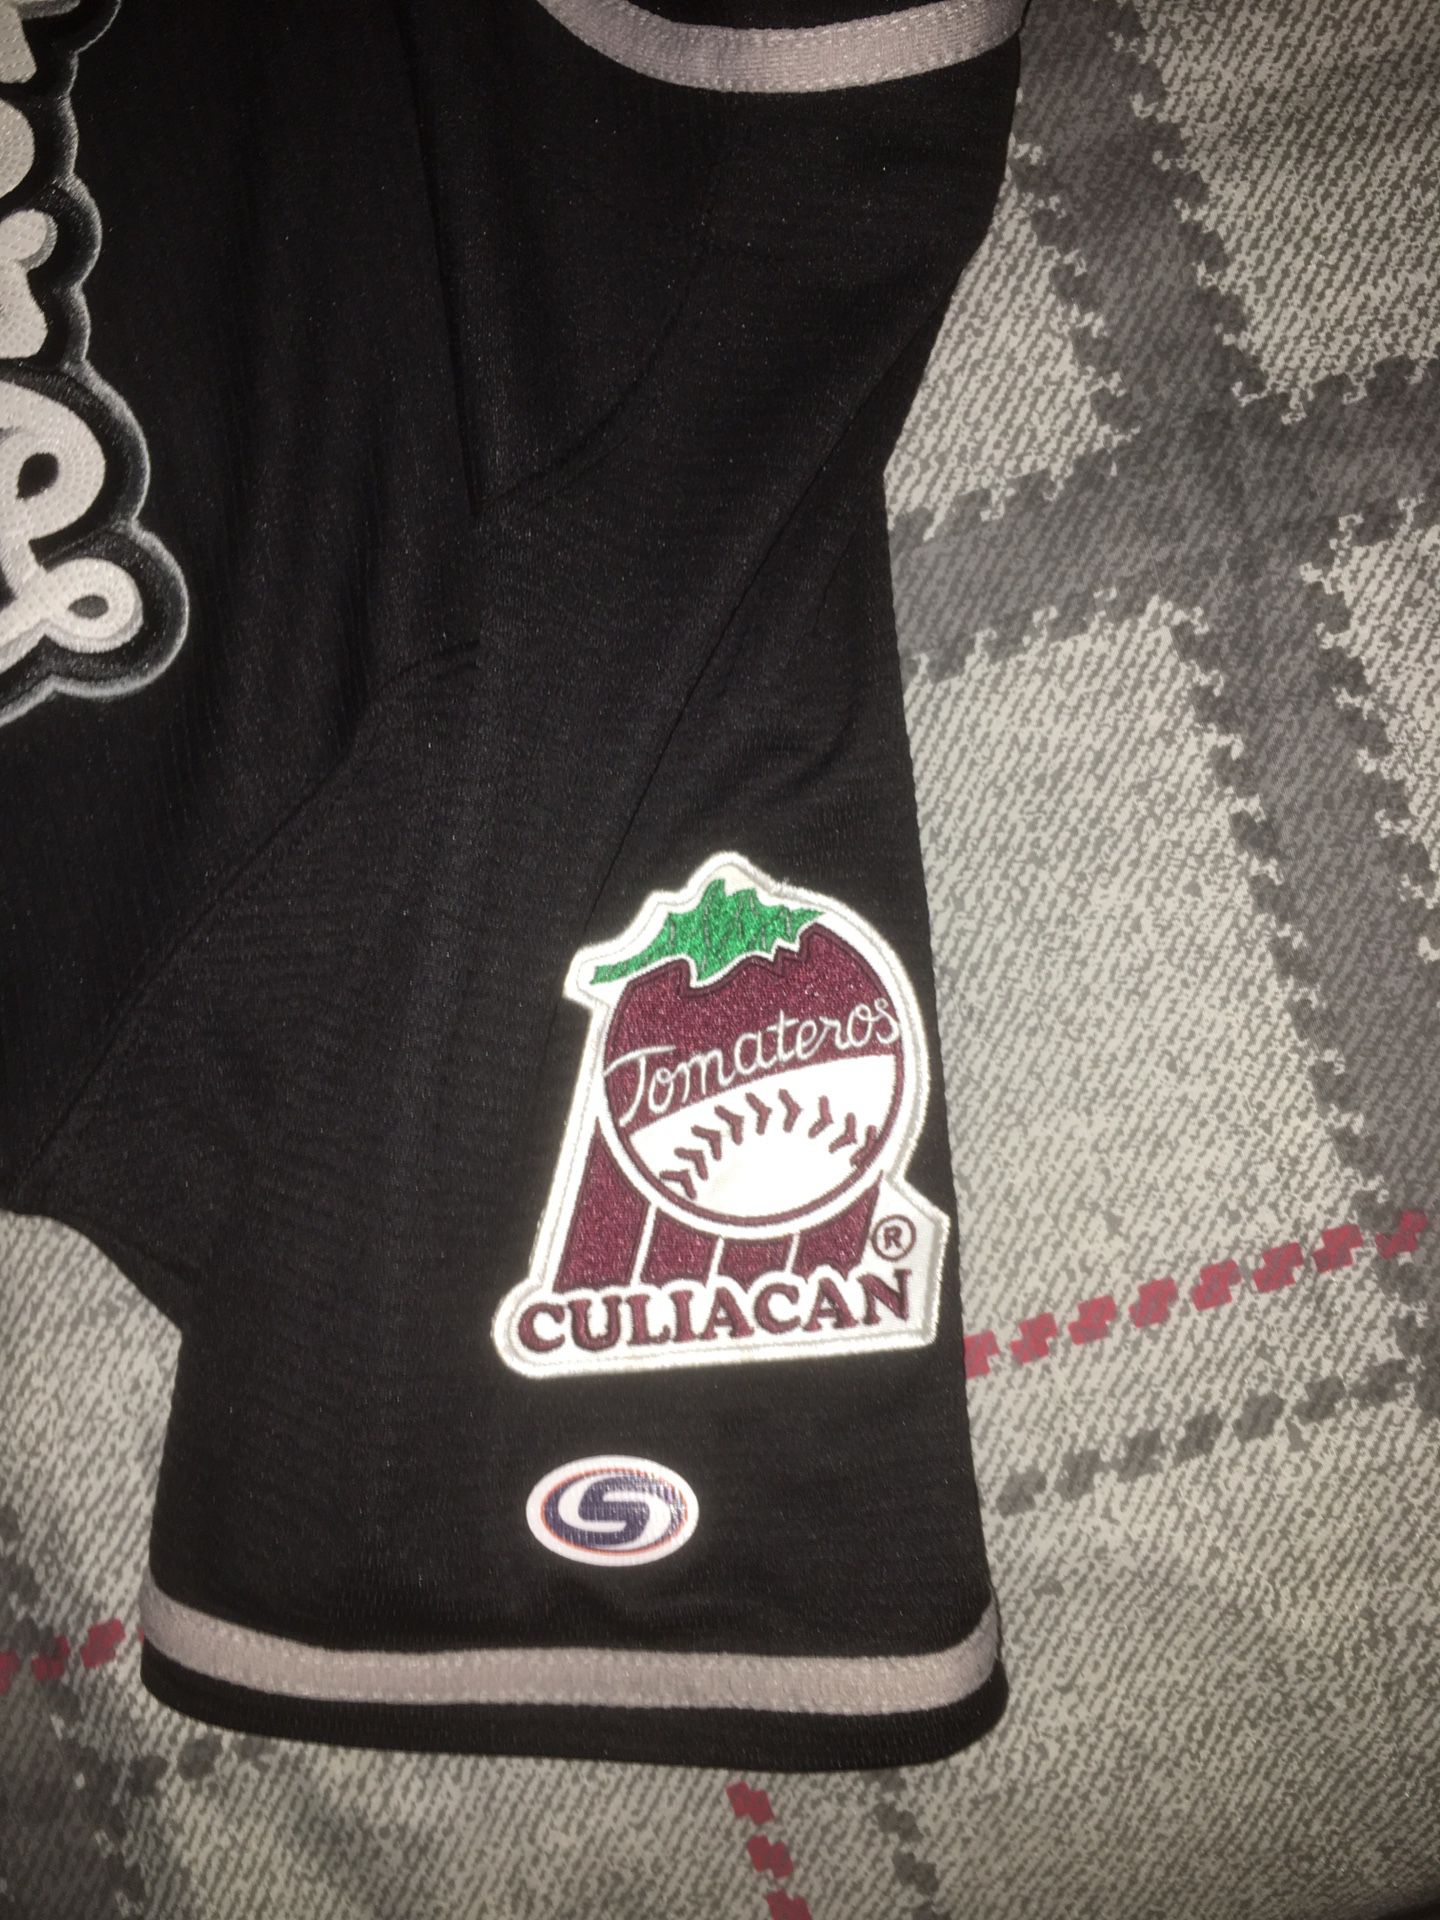 Tomateros de Culiacan Baseball Jersey for Sale in Ontario, CA - OfferUp